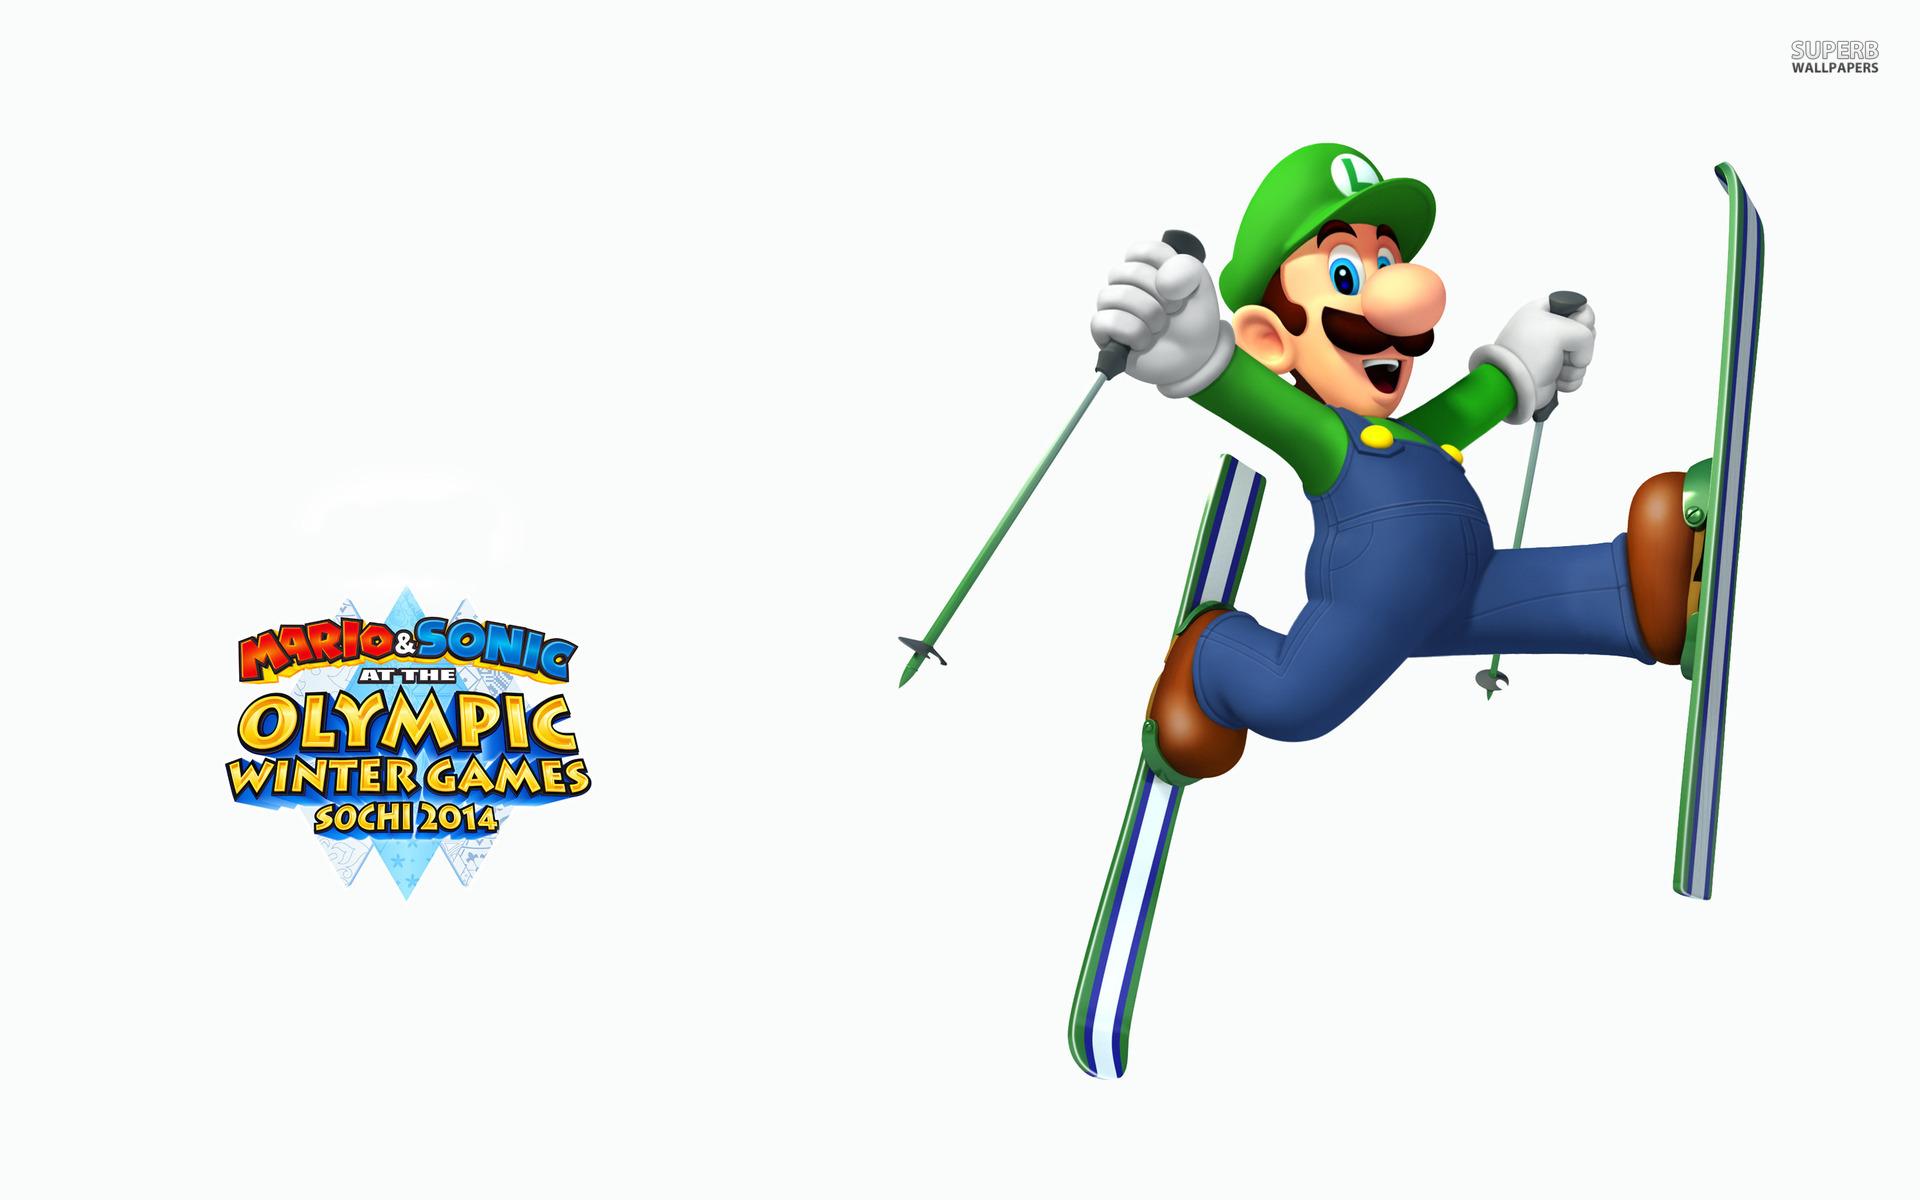 Video Game Mario & Sonic at the Olympic Games HD Wallpaper | Background Image